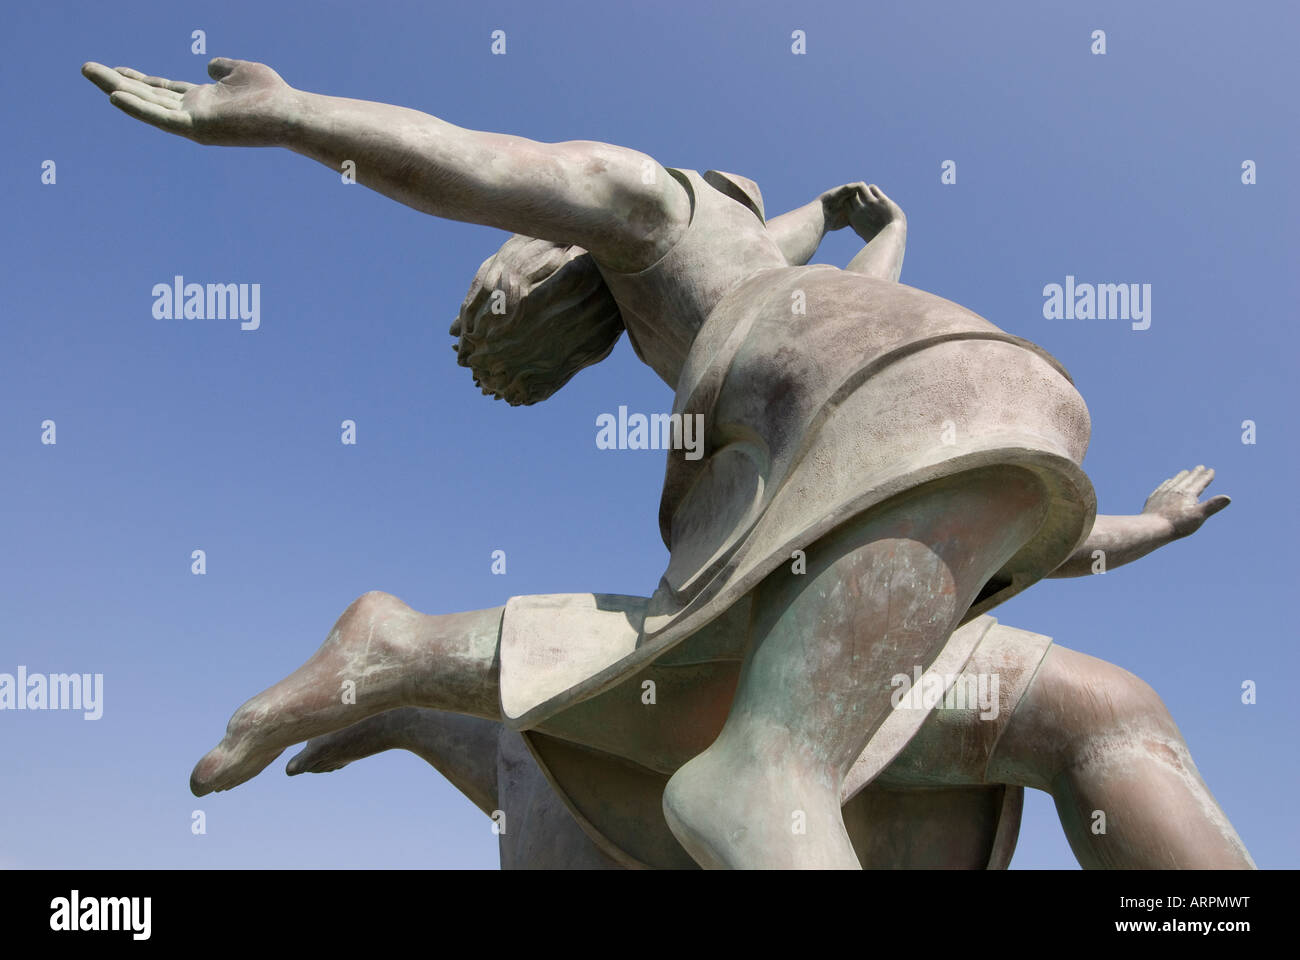 Statue of two females dancing Stock Photo